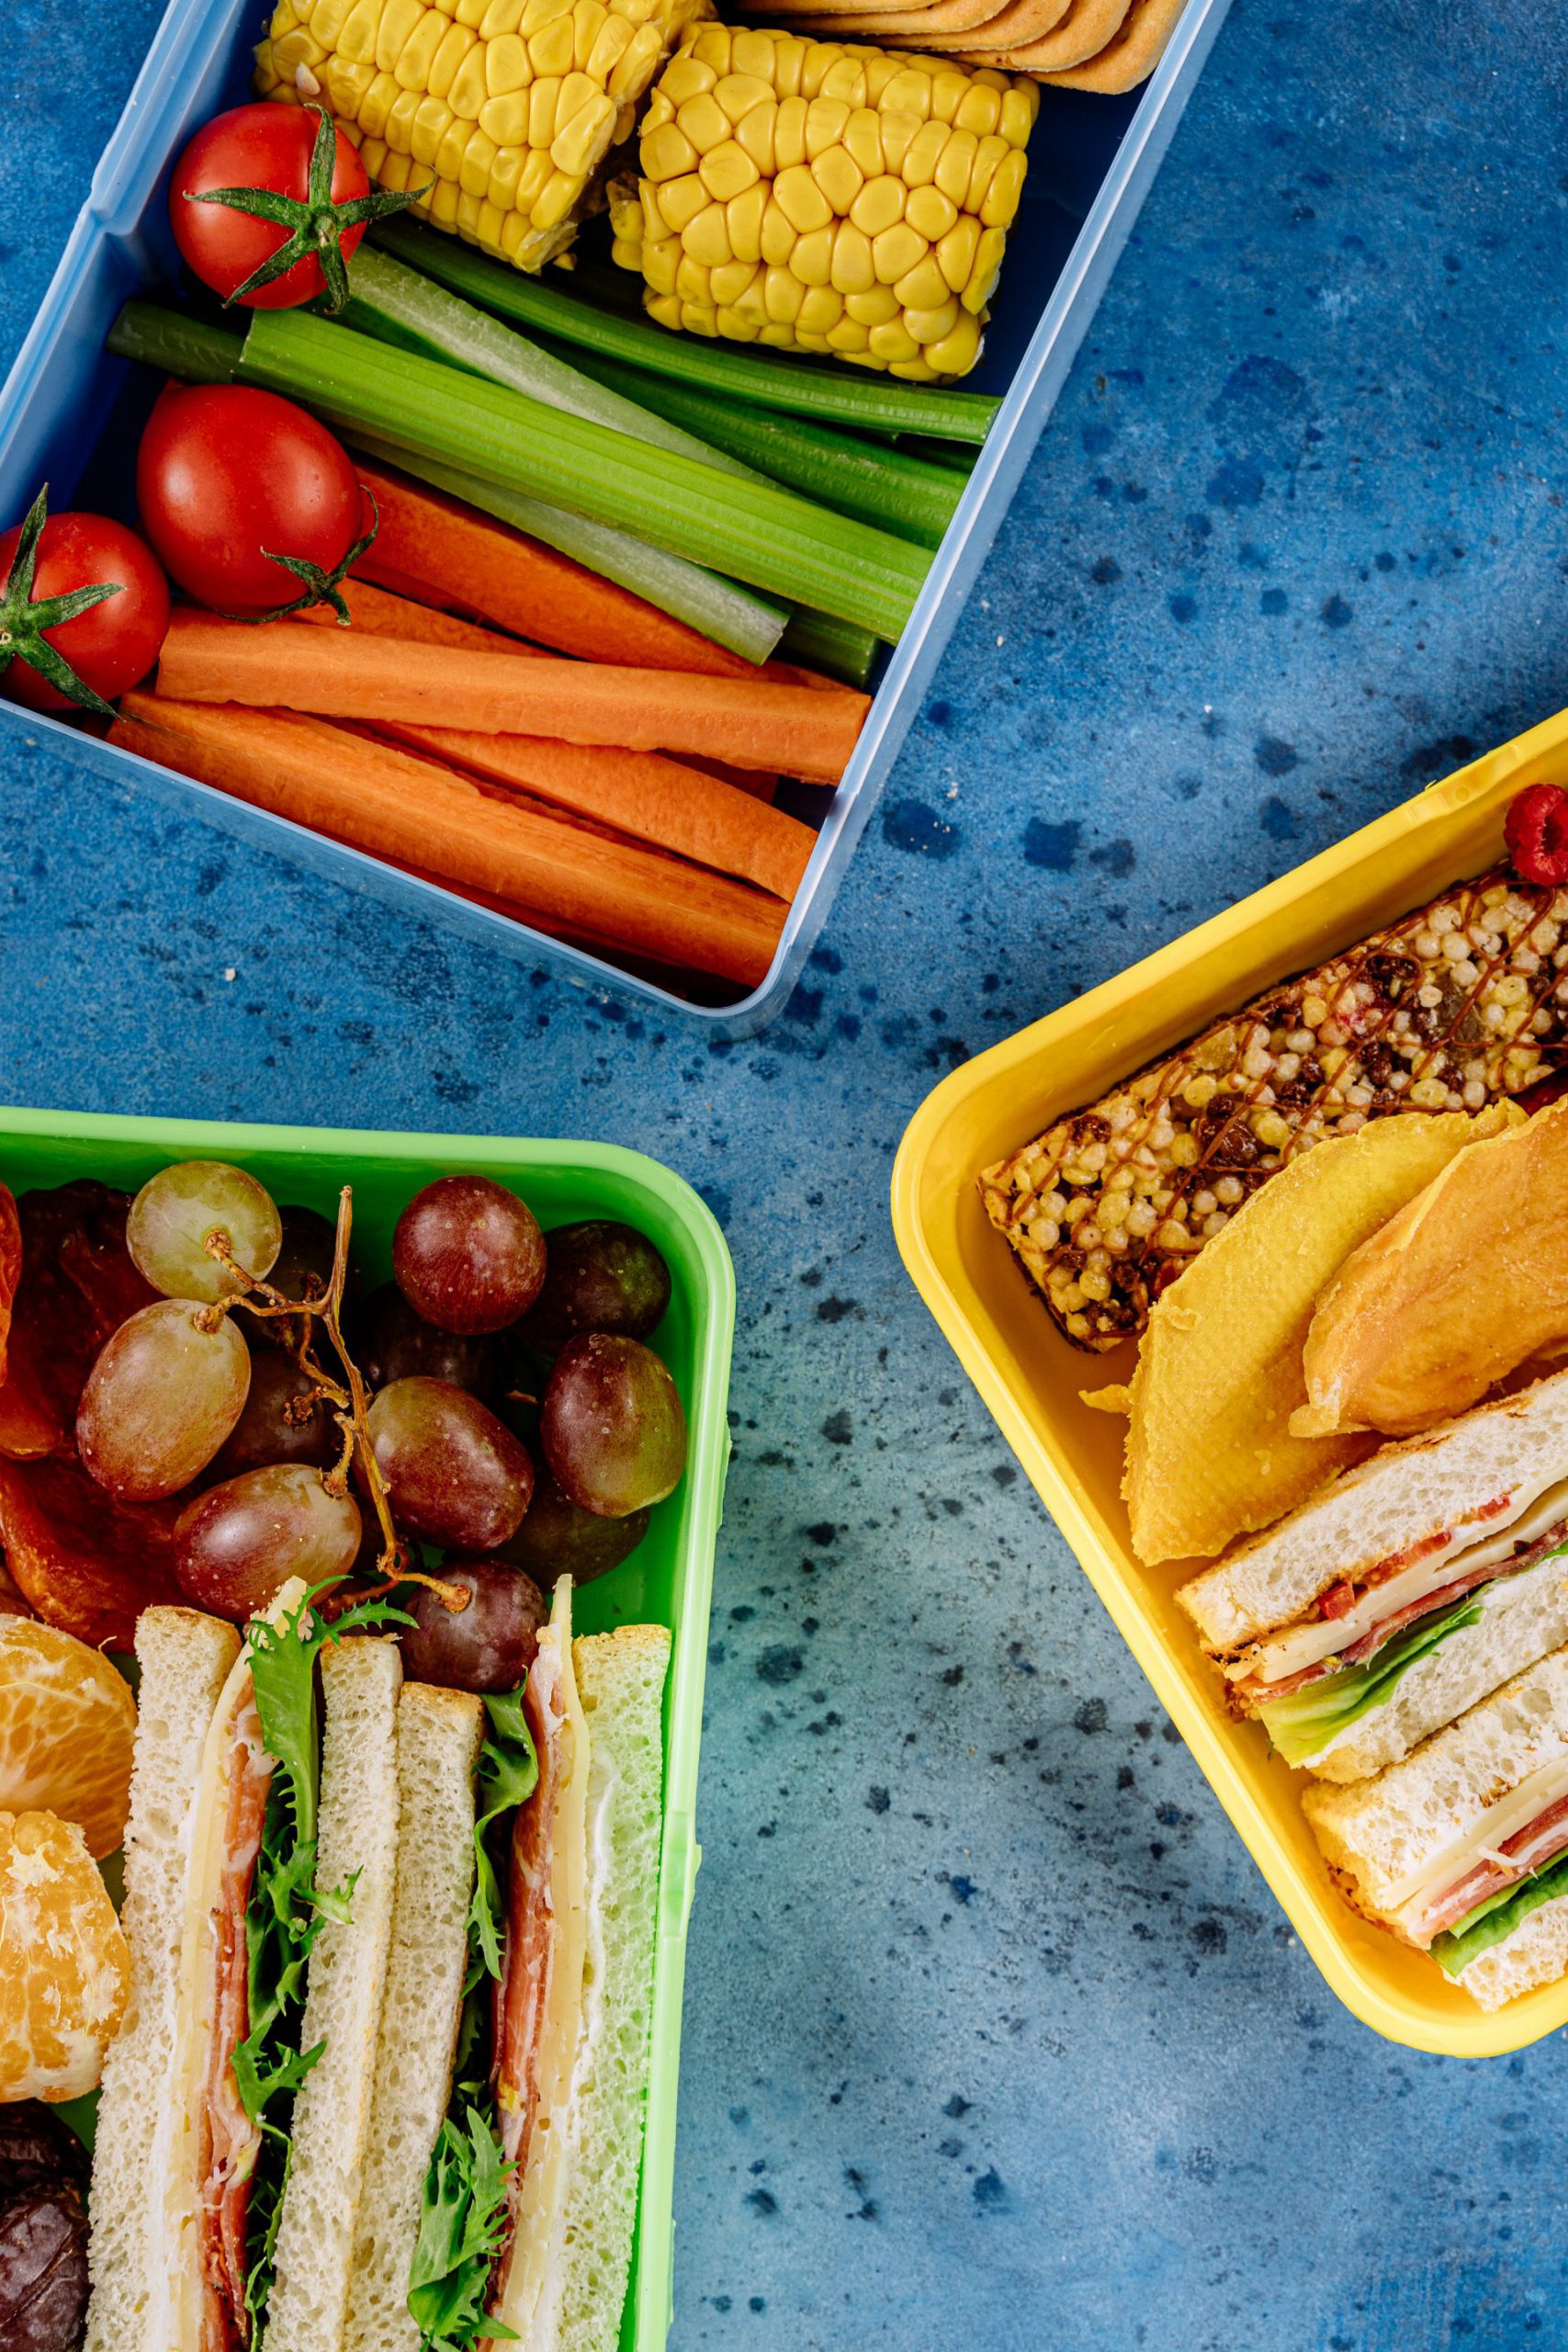 Your most nutritious back-to-school menus. Take note!